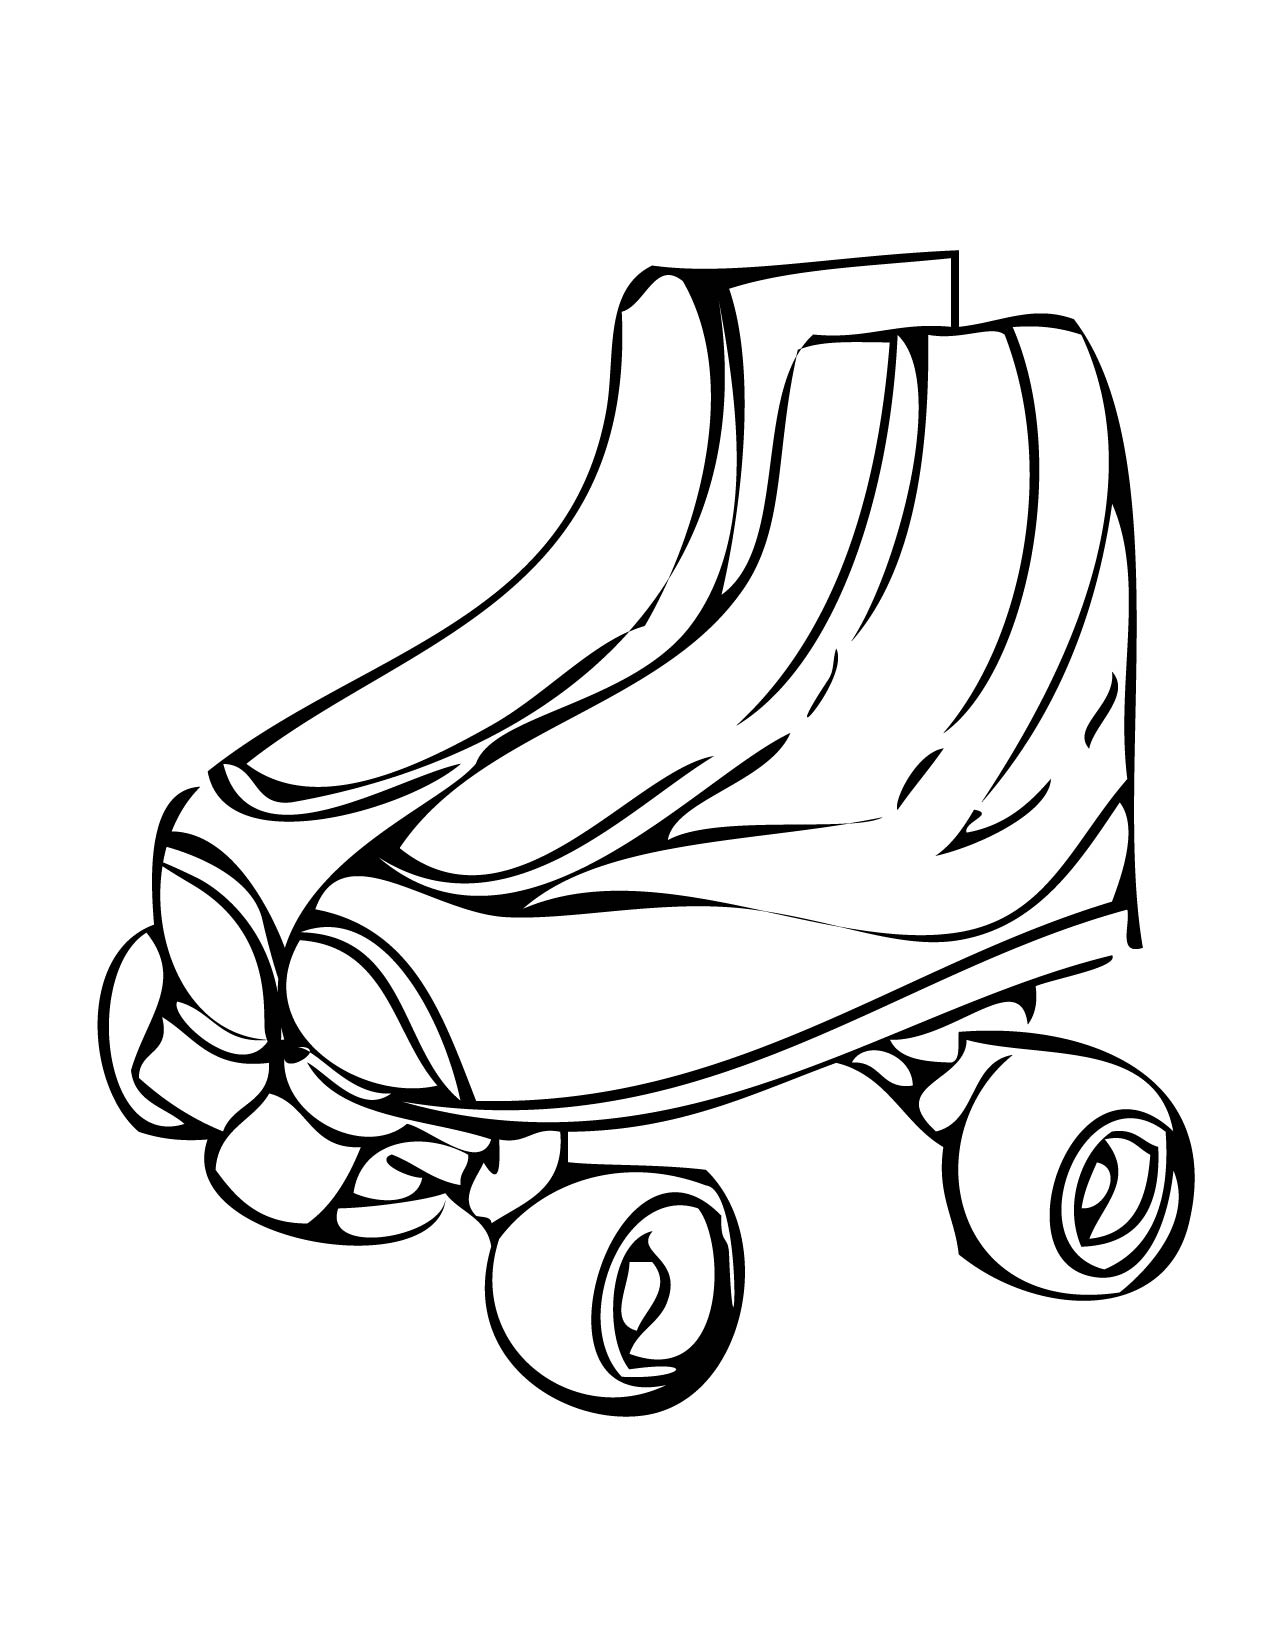 A Pair Shoes For Ice Skating Coloring Page